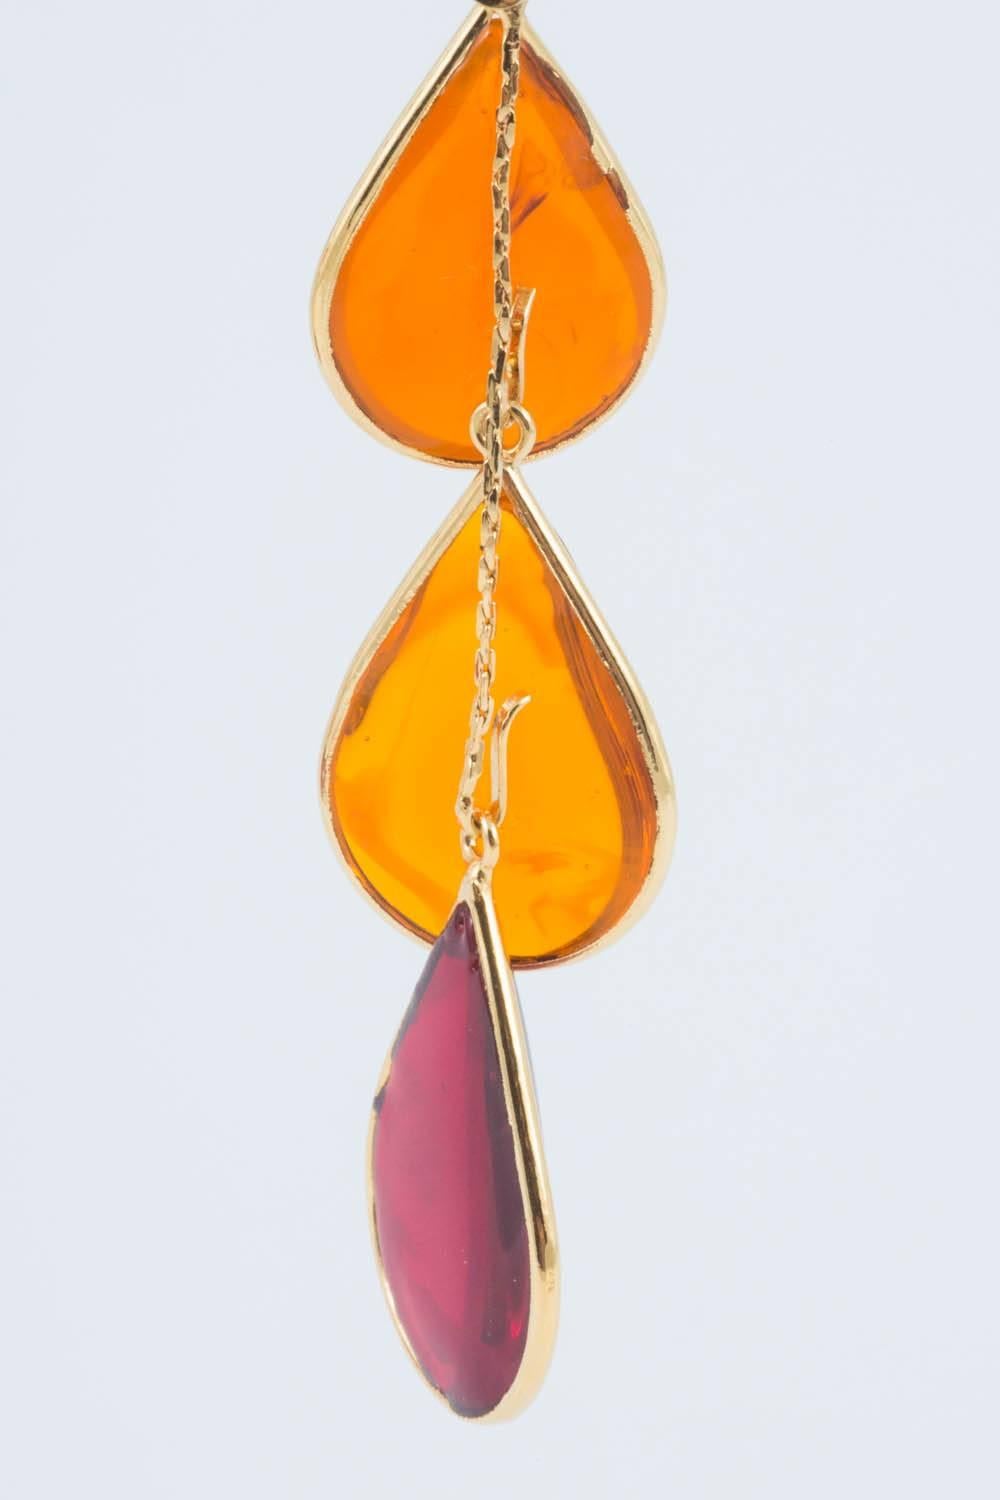 WW Collection orange and red poured glass drop earrings, 2017 3